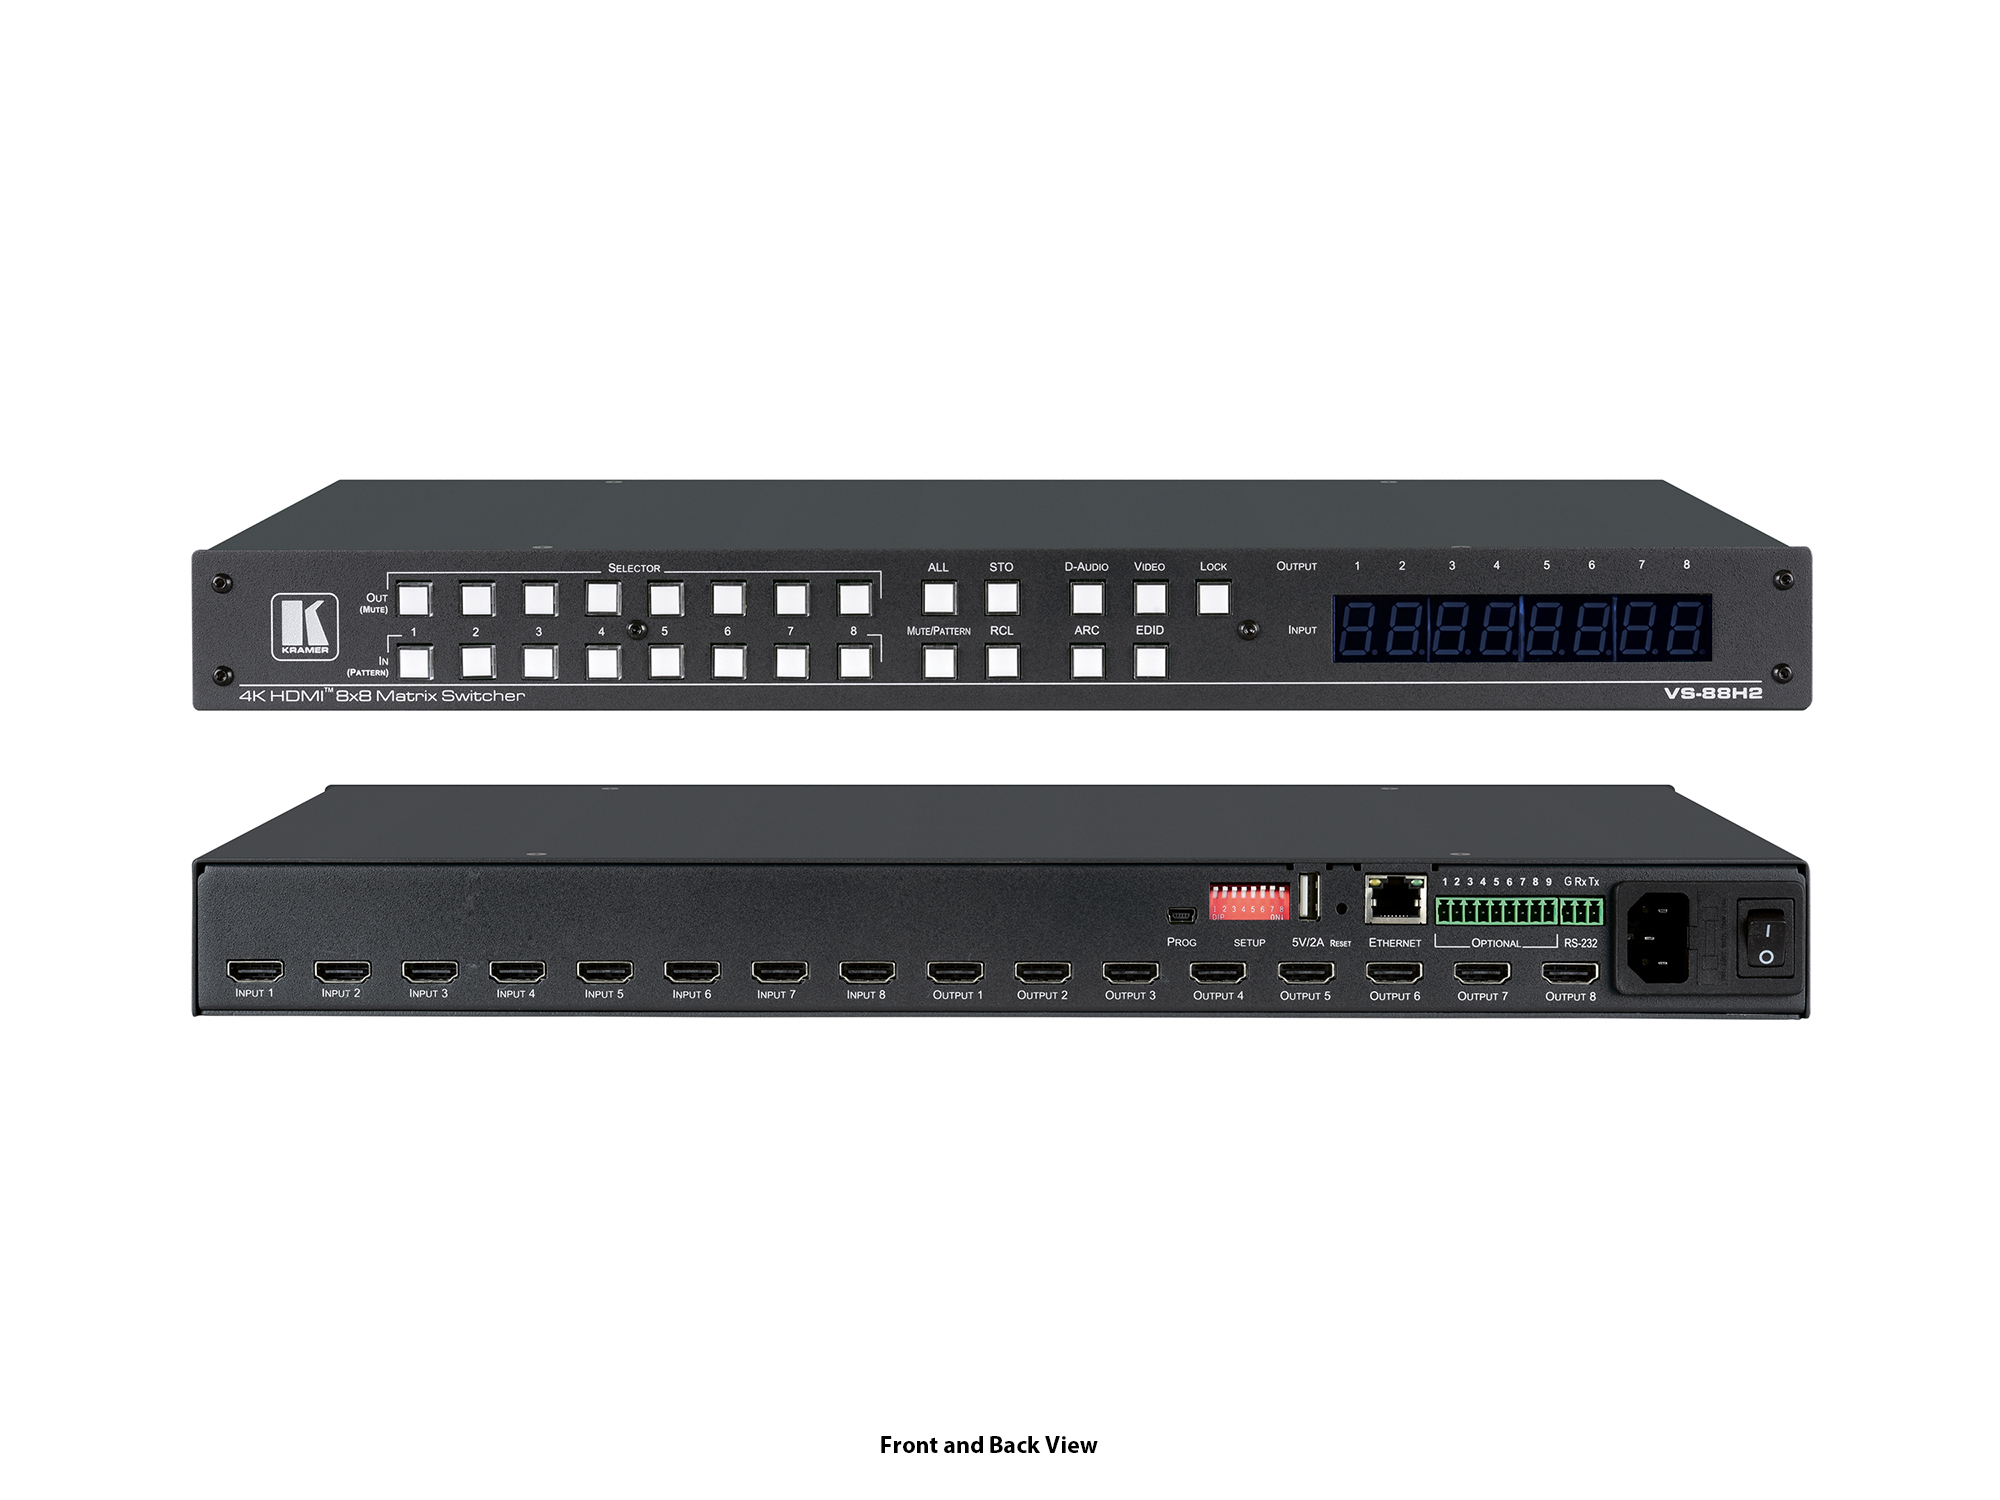 VS-88H2 8x8 4K HDMI HDR HDCP 2.2 Matrix Switcher with Digital Audio Routing by Kramer